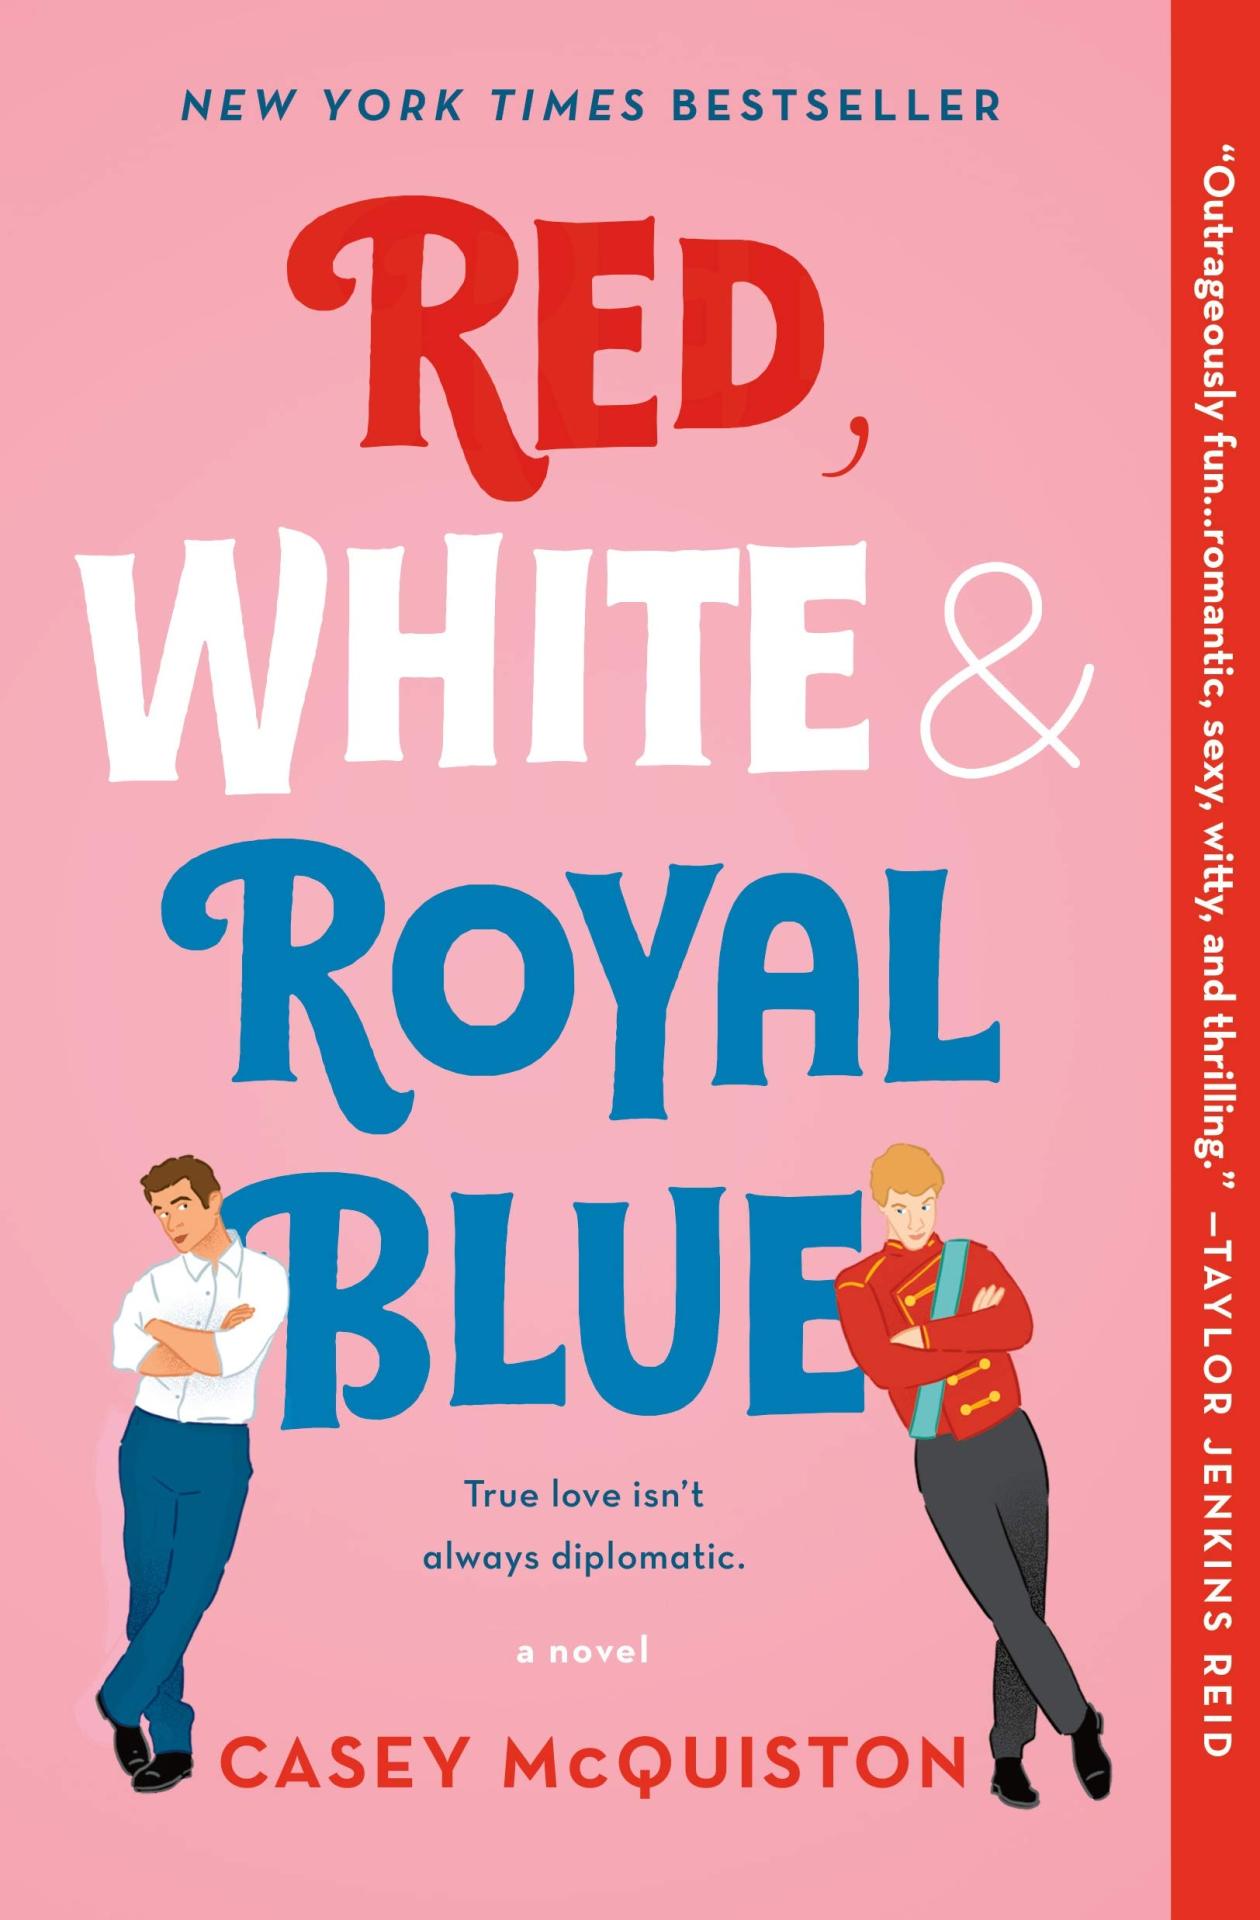 Title: Red, White, & Royal BlueAuthor: Casey McQuistonGenre: Fiction | Drama | Romance | Friendship | LGBTQ+Content Warnings: Homophobia | Drug Usage | Sexual Assault Mention Overall Rating: 10/10Personal Opinion: Outrageously hilarious. The interactions between Alex and his friends will have you cracking up. But the steamy romance growing between Alex and Henry will have your heart melted into a pile of goo. There’s just no way to put this book down as you read the way Alex, son of the first female president of the US, and Henry, heir to the throne of England, fall in love with each other, creating the hottest international scandal in decades.Couple Classification: Alex X Henry = Nerd/Prep X PrepDo I Own This Book? Yes! It was one of multiple Christmas gifts that I bought for myself!Spoilers Below For My Likes & Dislikes:Likes:- First and foremost, this book is ridiculously funny. The witty and intelligent banter between The White House trio as well as Alex and Henry is truly top- notch. Zahra also delivers the best lines in regards to giving lectures to Alex. But one of my favorite pieces of dialogue has to be when Alex came out to his mother, Ellen, and she just made a whole Powerpoint to discuss the possibilities of international scandal when it came to him dating the prince of Wales. She even got some pamphlets on safe sex from Planned Parenthood! It killed me!- Nora and her chaotic bisexuality is just beautiful. “I don’t know. I touched a boob. It wasn’t that profound.” “If you let me, I will show you one boob. The good one.” “You’re so hot when you get indignant.” Like babe, I just love you so much. She’s also so brilliant. The moment when she burst into the Oval Office after disappearing for two days with proof that Alex was set up to be outed by Republicans is just amazing. I loved her sleep deprived ass so much at that moment. I will also never forget how Alex went to London and instead of being worried about him, she just let June freak the fuck out before texting, “Hey, has anyone seen my Chuck Taylors?” She’s a comedy genius.- The email and text convos between Alex and Henry were honestly so romantic. And so steamy too. You could feel the desire and yearning in their words. They have such distinct writing styles too. It matches their upbringings and overall demeanor. They opened up a lot more too in the emails than in person, in my opinion. I mean, they got really horny in each other’s presence and I do not blame them but that’s why I appreciate how much they just open up in their texts. But also, that first phone call will forever have me rolling. Thanksgiving, Alex persuaded his mother to let him keep the turkeys in his room, and he is terrified of the birds. He and Henry have such a cute conversation and Henry does an amazing job at just being there for him. Also their insults and jabs at one another are honestly so cute. Like, you can tell that they’re enjoying it and like each other’s company even when it’s poking fun at one another.- The horny scenes were truly something else. They were so sexy and steamy and utterly captivating. From the moment Alex took Henry away from the dinner at the White House to furiously make out with him? I had to fan myself. Poor Amy, having to be dragged into it. I do love the inner circle of the ones in the know though.- Alex being repressed is so funny because it’s not from any homophobic upbringing. He’s just stupid and it never even occurred him. He casually had thoughts about Shaan, Luna, and even Henry’s dad as these hot men and it just never once occurred to him that it was not admiration and in fact, sexual attraction. Then, when he does realize it, he’s flabbergasted as to how he never realized it. He was like the last one to realize it! Nora knew and June also had suspicions. His dad could tell right away when Alex and Henry were in close proximity to one another. His mom was not the least bit shocked by the coming out (only the fact that his “special someone” was the heir to the British empire). For God’s sake, Alex even made out with his friend Liam and it just never occurred to him that it meant more than just horny teens being horny teens. I truly think that this is the funniest form of repression.- Bea and Catherine being in Henry’s corner is so fucking important to me. Especially as someone whose mother has been absent for most of his life. In Henry’s case, he knew what it was like to have a mom who wasn’t checked out. She was capable of it. But she shut down after the passing of his father to cancer. But as soon as he was in a crisis because he had been outed, his mother came back to him. She did all she could to protect him from Queen Mary’s iron fist and I’d cry tears of joy for her if I really wanted to. Because when her son was in trouble, she finally found the strength to stand up and that was just so admirable.- The whole cast is so diverse and colorful. They all have such dynamic personalities even if they don’t talk much. Amy is an Asian trans lesbian (with a wife too!) with many confirmed kills and likes to knit. Cash is also a secret service member and he very casually comes out to the reader as pansexual with the flag stitched into his jacket, a gift from Amy. Rafael Luna is a Senator, he’s gay, he’s Latino, and he really infiltrated the guy running against Ellen to take him down from the inside. He’s a hero. Then we also have Pez who is black and rich and needed more screentime honestly. This book has sexuality, POC, women in positions of power, blended families, and even covers drug addiction. It’s such a wide range and I truly love and respect the hell out of it for that.- Something else I love is the acknowledgment of so many queer historical figures. They did not shy away from the love letters passed between those of the same sex and calling the letters romantic. I especially love the reminder of the very blatant gayness of King James I and his romantic relationship with George Villiers. Henry, as a repressed gay, had to find all new avenues to explore his identity. And turning to history and living vicariously through his ancestors/people from his country is exactly how I do it too so that makes him very relatable to me.- The last chapter is kind of everything to me. It was totally intense and enrapturing. I love Alex and Liam reconnecting after all these years. Especially after their last interaction when Liam was annoyed with him. But he was always on Alex’s side and he even has a handsome boyfriend to parade around. I truly loved it. Good for all of them, honestly. They deserved that happy ending.Dislikes:- The pacing is kind of choppy in the beginning. From the moment they get into this arrangement of pretending to be best friends, it feels like the events of the day just zip by. Even when they were suddenly pushed into the closet because of supposed “gunfire” at the hospital. They also become rather used to each other kinda quickly. Although I suppose they hadn’t actually contacted each other afterward until much later. I am willing to let it pass though. Because once you hit a stride, it flows much better.- Ayyyyy, fuck you Queen Mary and Rep. presidential nominee Richards. You’re both assholes for very different reasons but of course, they were meant to be asses. So this isn’t really a thing to hold against the book. It is very infuriating that Richards violated the privacy of the First Family and the Royal Family and still somehow managed to almost win the election. But I guess that also reflects reality in a way. Because oh my god, 2016-2020 in reality has been a nightmare. Not only that, but Richards also preyed on young interns in their teens! Also regardless of gender. And this guy is out here spouting fucking nonsense about the sanctity of traditional values and also saying the security at the White House is too lax. A hypocrite, a liar, and a complete douche. God, what a relief he fucking lost.- I’m not sure how I feel about the nickname “H” for Henry. I mean, I get that the first letter of a name can be a nickname but H is such an unsexy letter to say. “Z” for Zahra is way better. But “H”? I mean, really? I thought it was just a nickname to use in the start of emails and texts but no, both Alex and Bea used it in person! I don’t get it. Personally.- I think it was kind of a missed opportunity to not address June’s concerns about their family. She was right in the end. It really felt like their mother and father cared more about work than them as a family. But I do think Ellen came to the realization that she needs a better work-life balance with the conversation she had with Alex post-outing. I think it was meant to be this big revelation for June as well. That their mom would be there for them when it came to it and even the presidency or the election could be side-barred if need be. So while I think it works, I wish we saw more of June’s reaction to it rather than leaving it open-ended.- Kind of wish we knew the fate of Pez and June. I also just want to know more about Amy and Cash. I just love them. But I don’t think it’s a bad thing to not focus on them. I mean, the story isn’t even about them. I just love them so much. Anyway, I’m basically out of complaints already. And most of these were barely complaints, in my opinion. #Booklr#Booksbooksbooks#Book Blog#Book Review#Book Recs #Red White and Royal Blue #Casey McQuiston#LGBTQ#Queer Books#Queer Lit#Queer Representation #Seriously everyone should read this book  #Once you hit the Thanksgiving scene everything becomes incredible